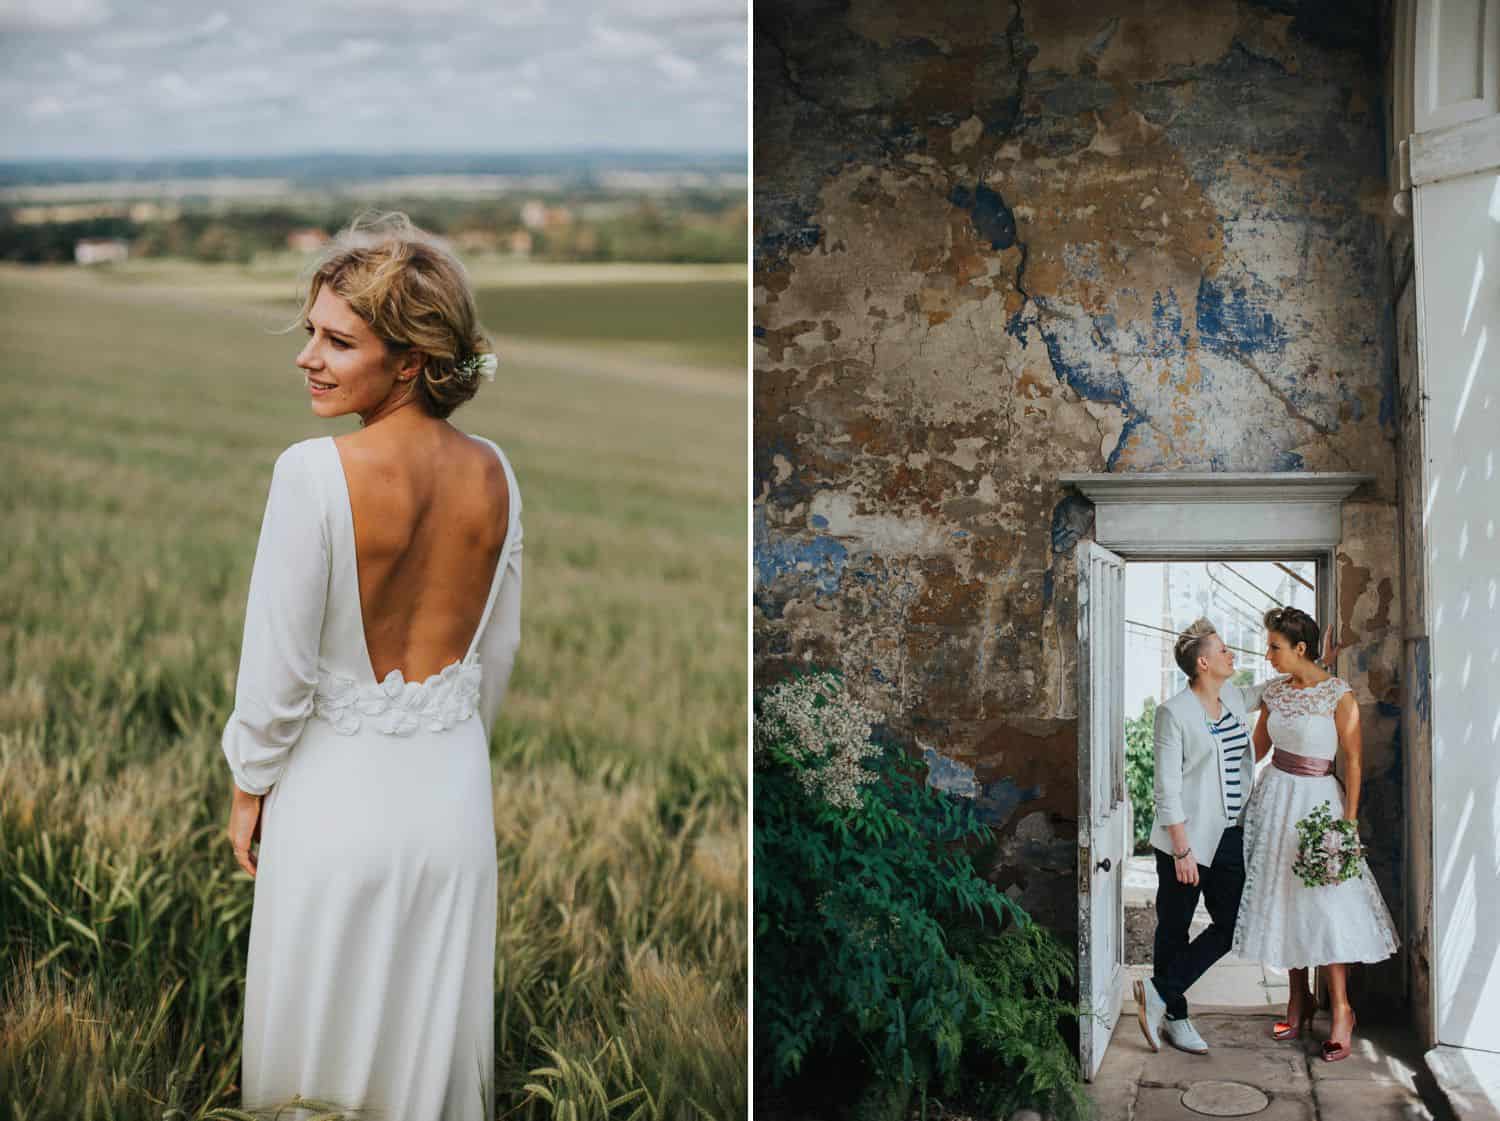 How To Make A Photography Website Your Dream Clients Can’t Resist: A bride stands in a field in a backless gown. Two brides stand face-to-face in the doorway of an old atrium.